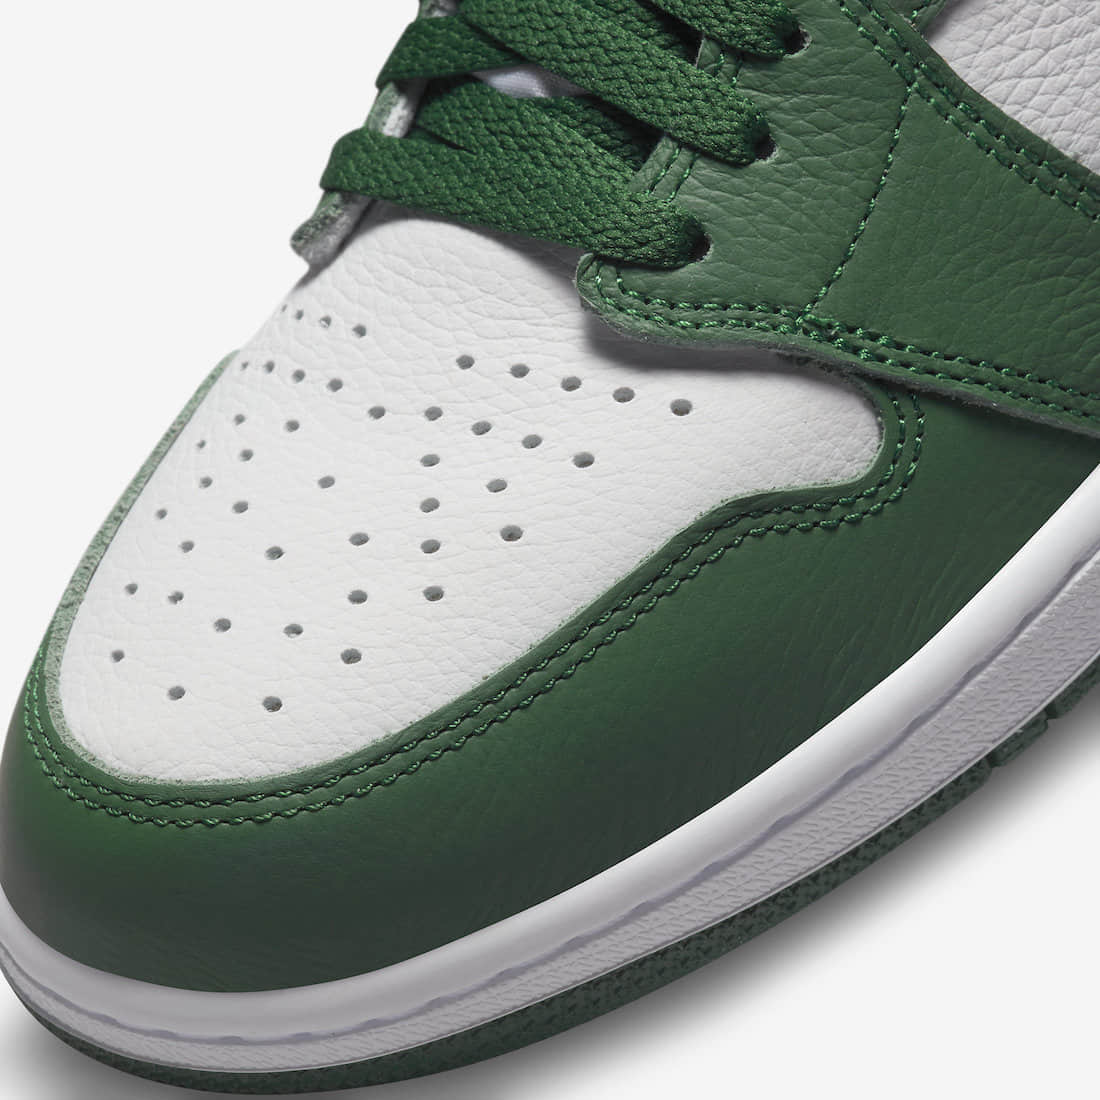 Nike Air Jordan 1 Retro High OG 'Gorge Green' DZ5484-303 - Authentic Sneakers for Sale!